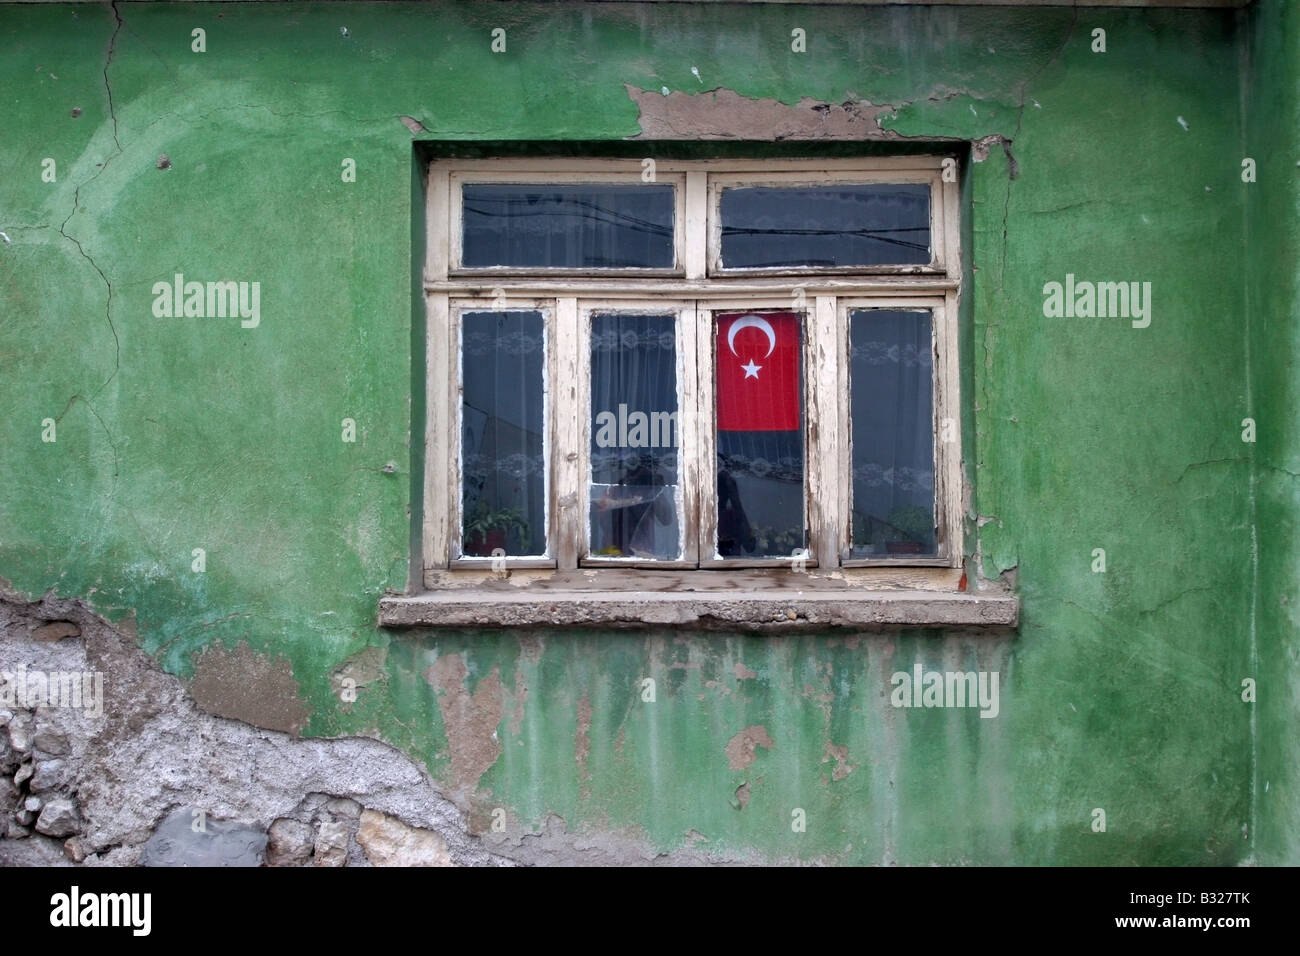 Turkey's flag hang in a window suranded with green old wall Stock Photo